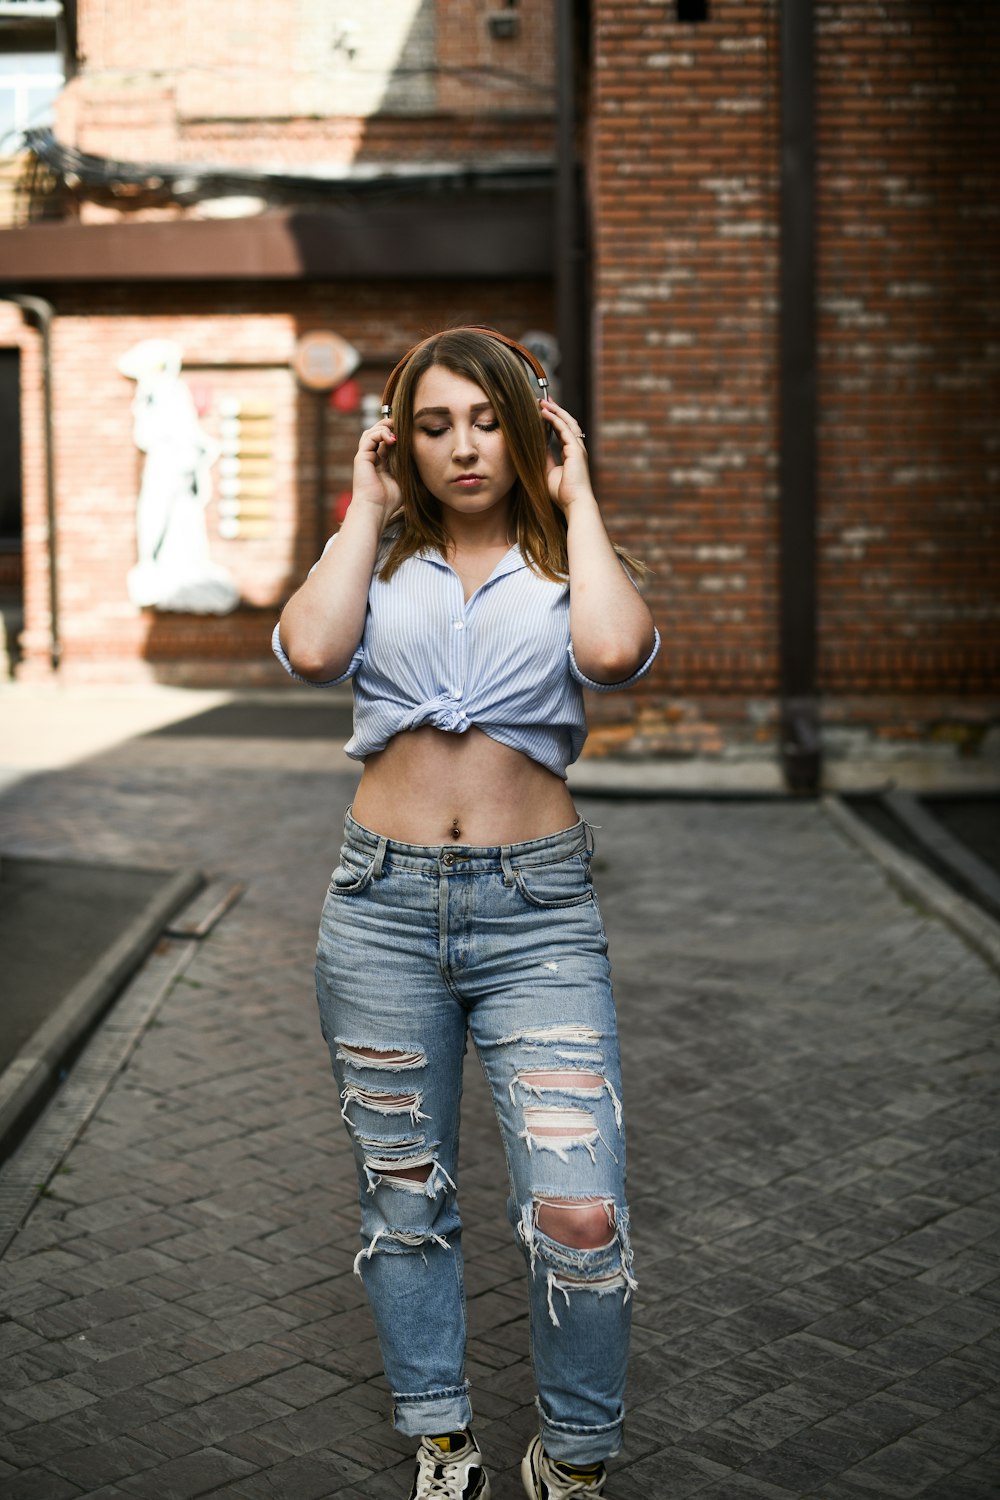 woman in pink sports bra and blue denim jeans standing on sidewalk during daytime